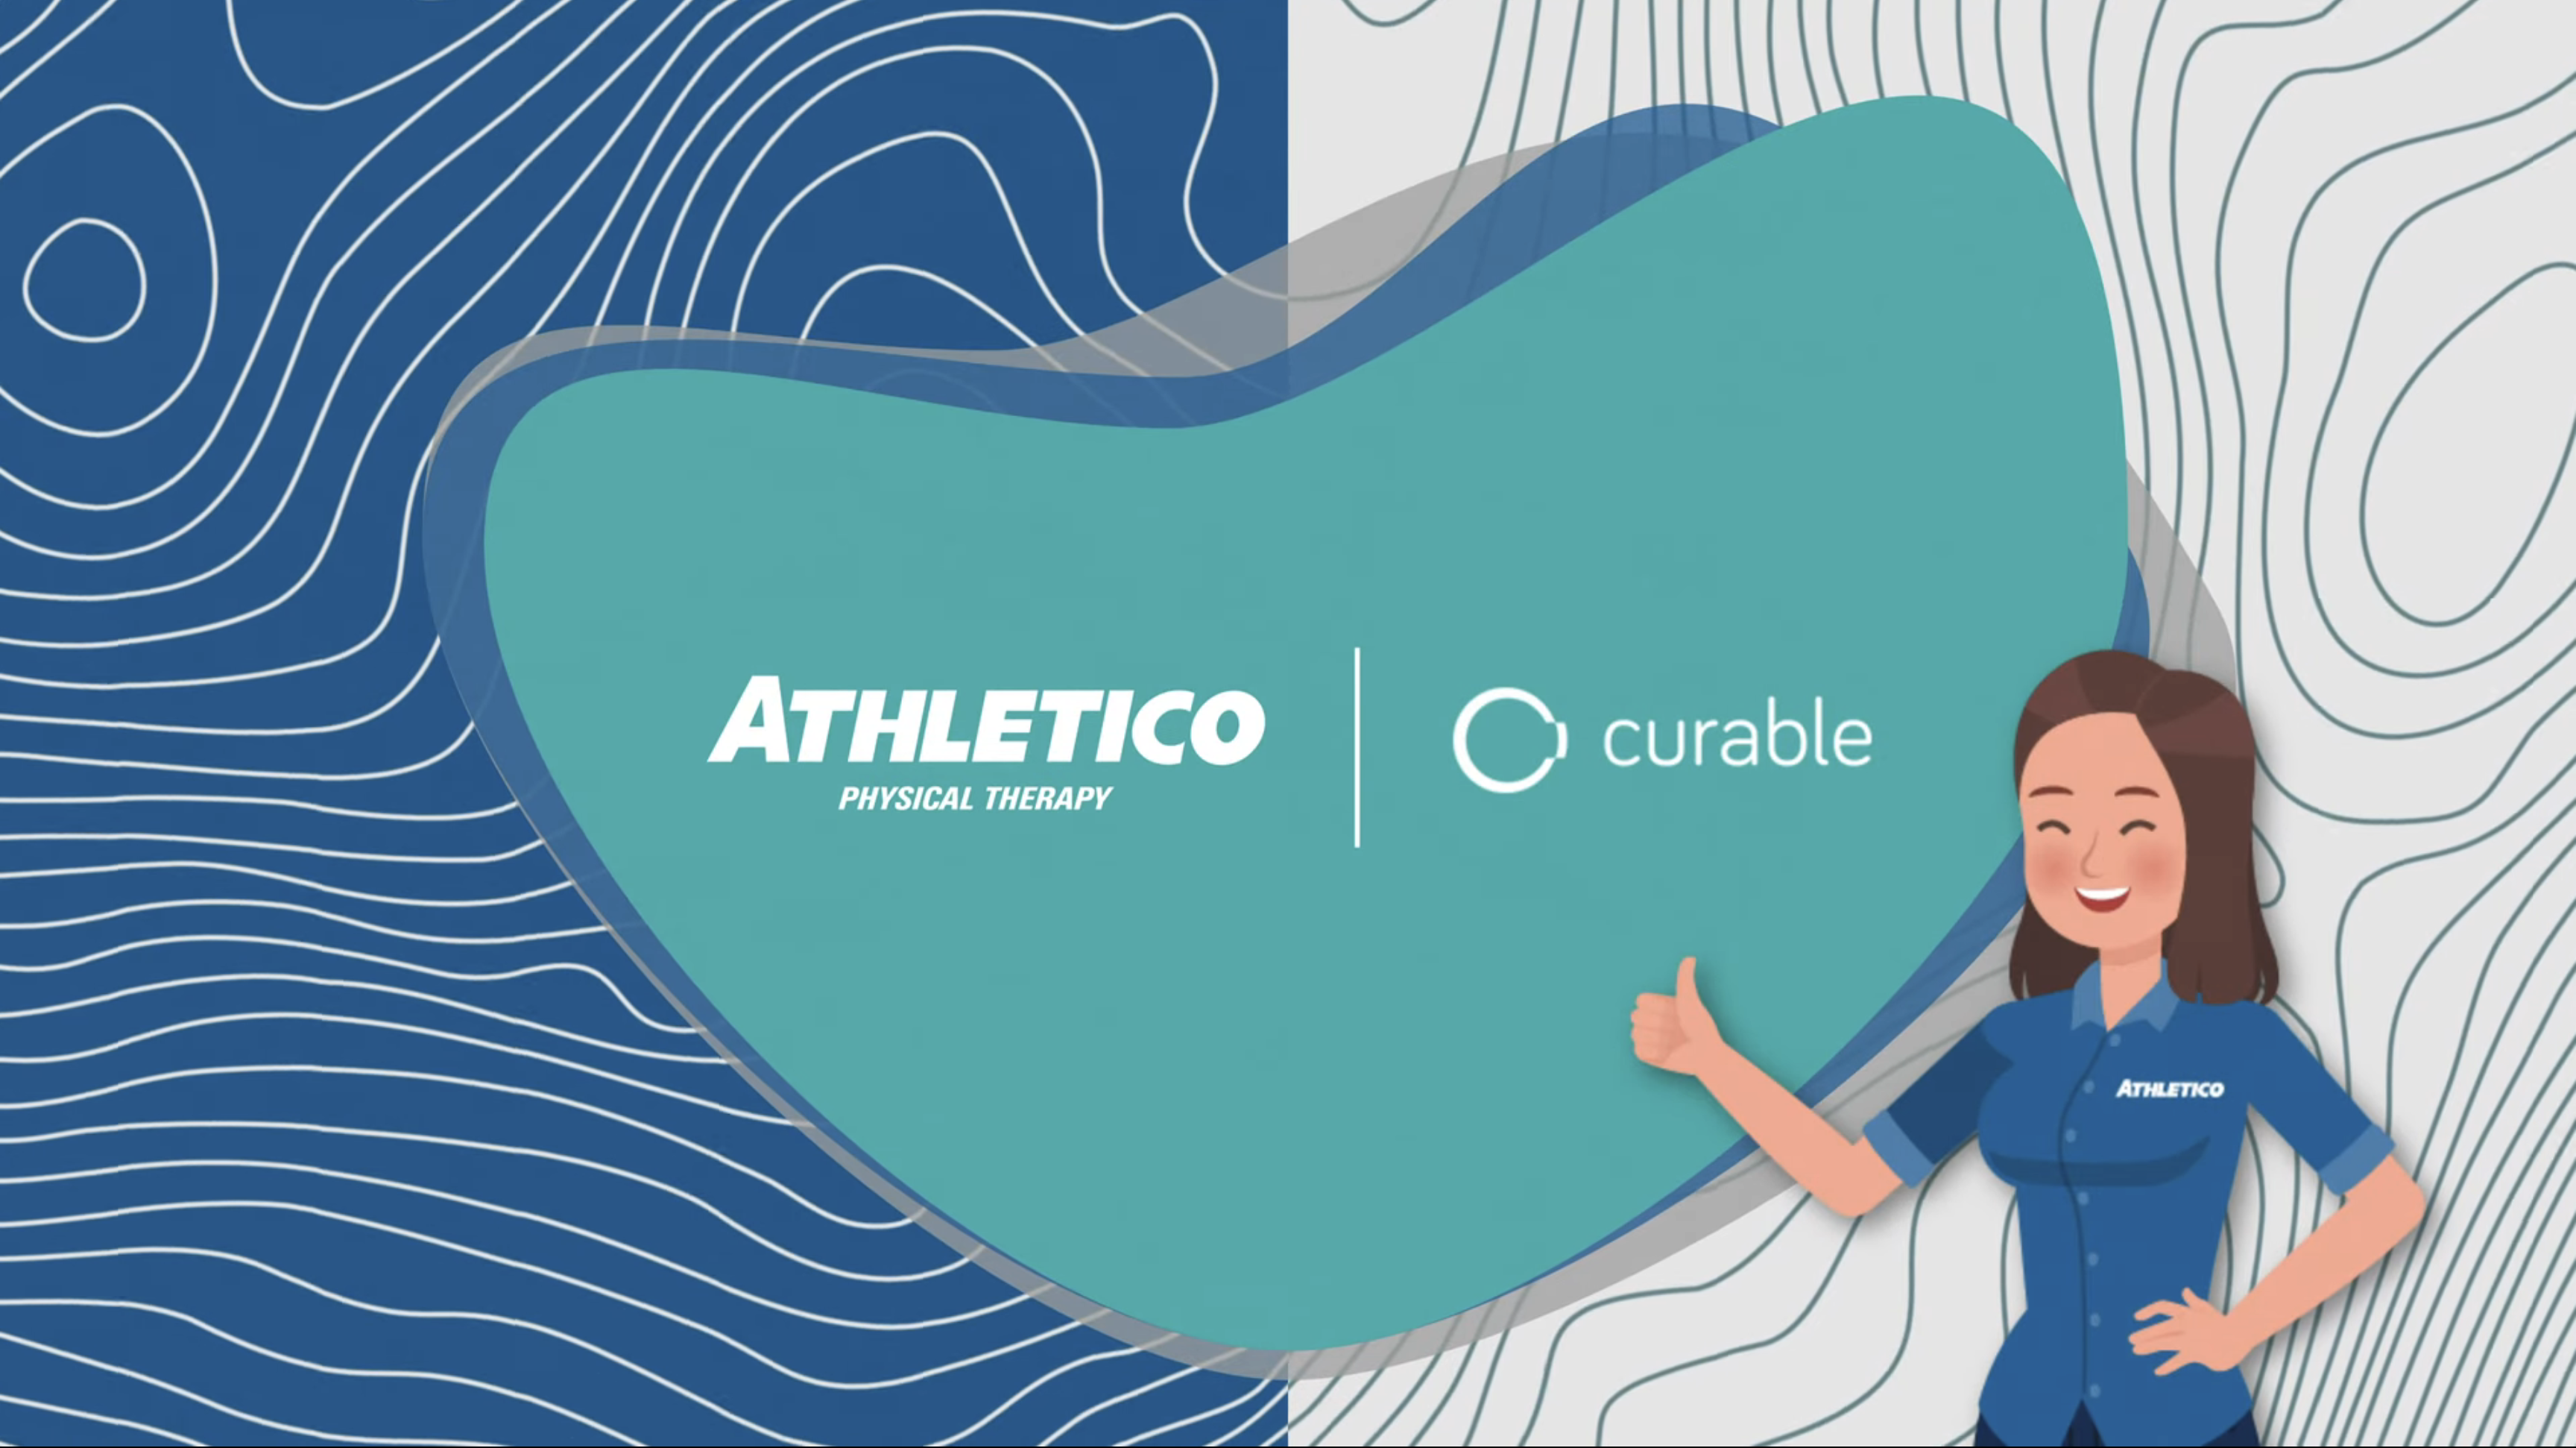 Athletico Physical Therapy / Curable